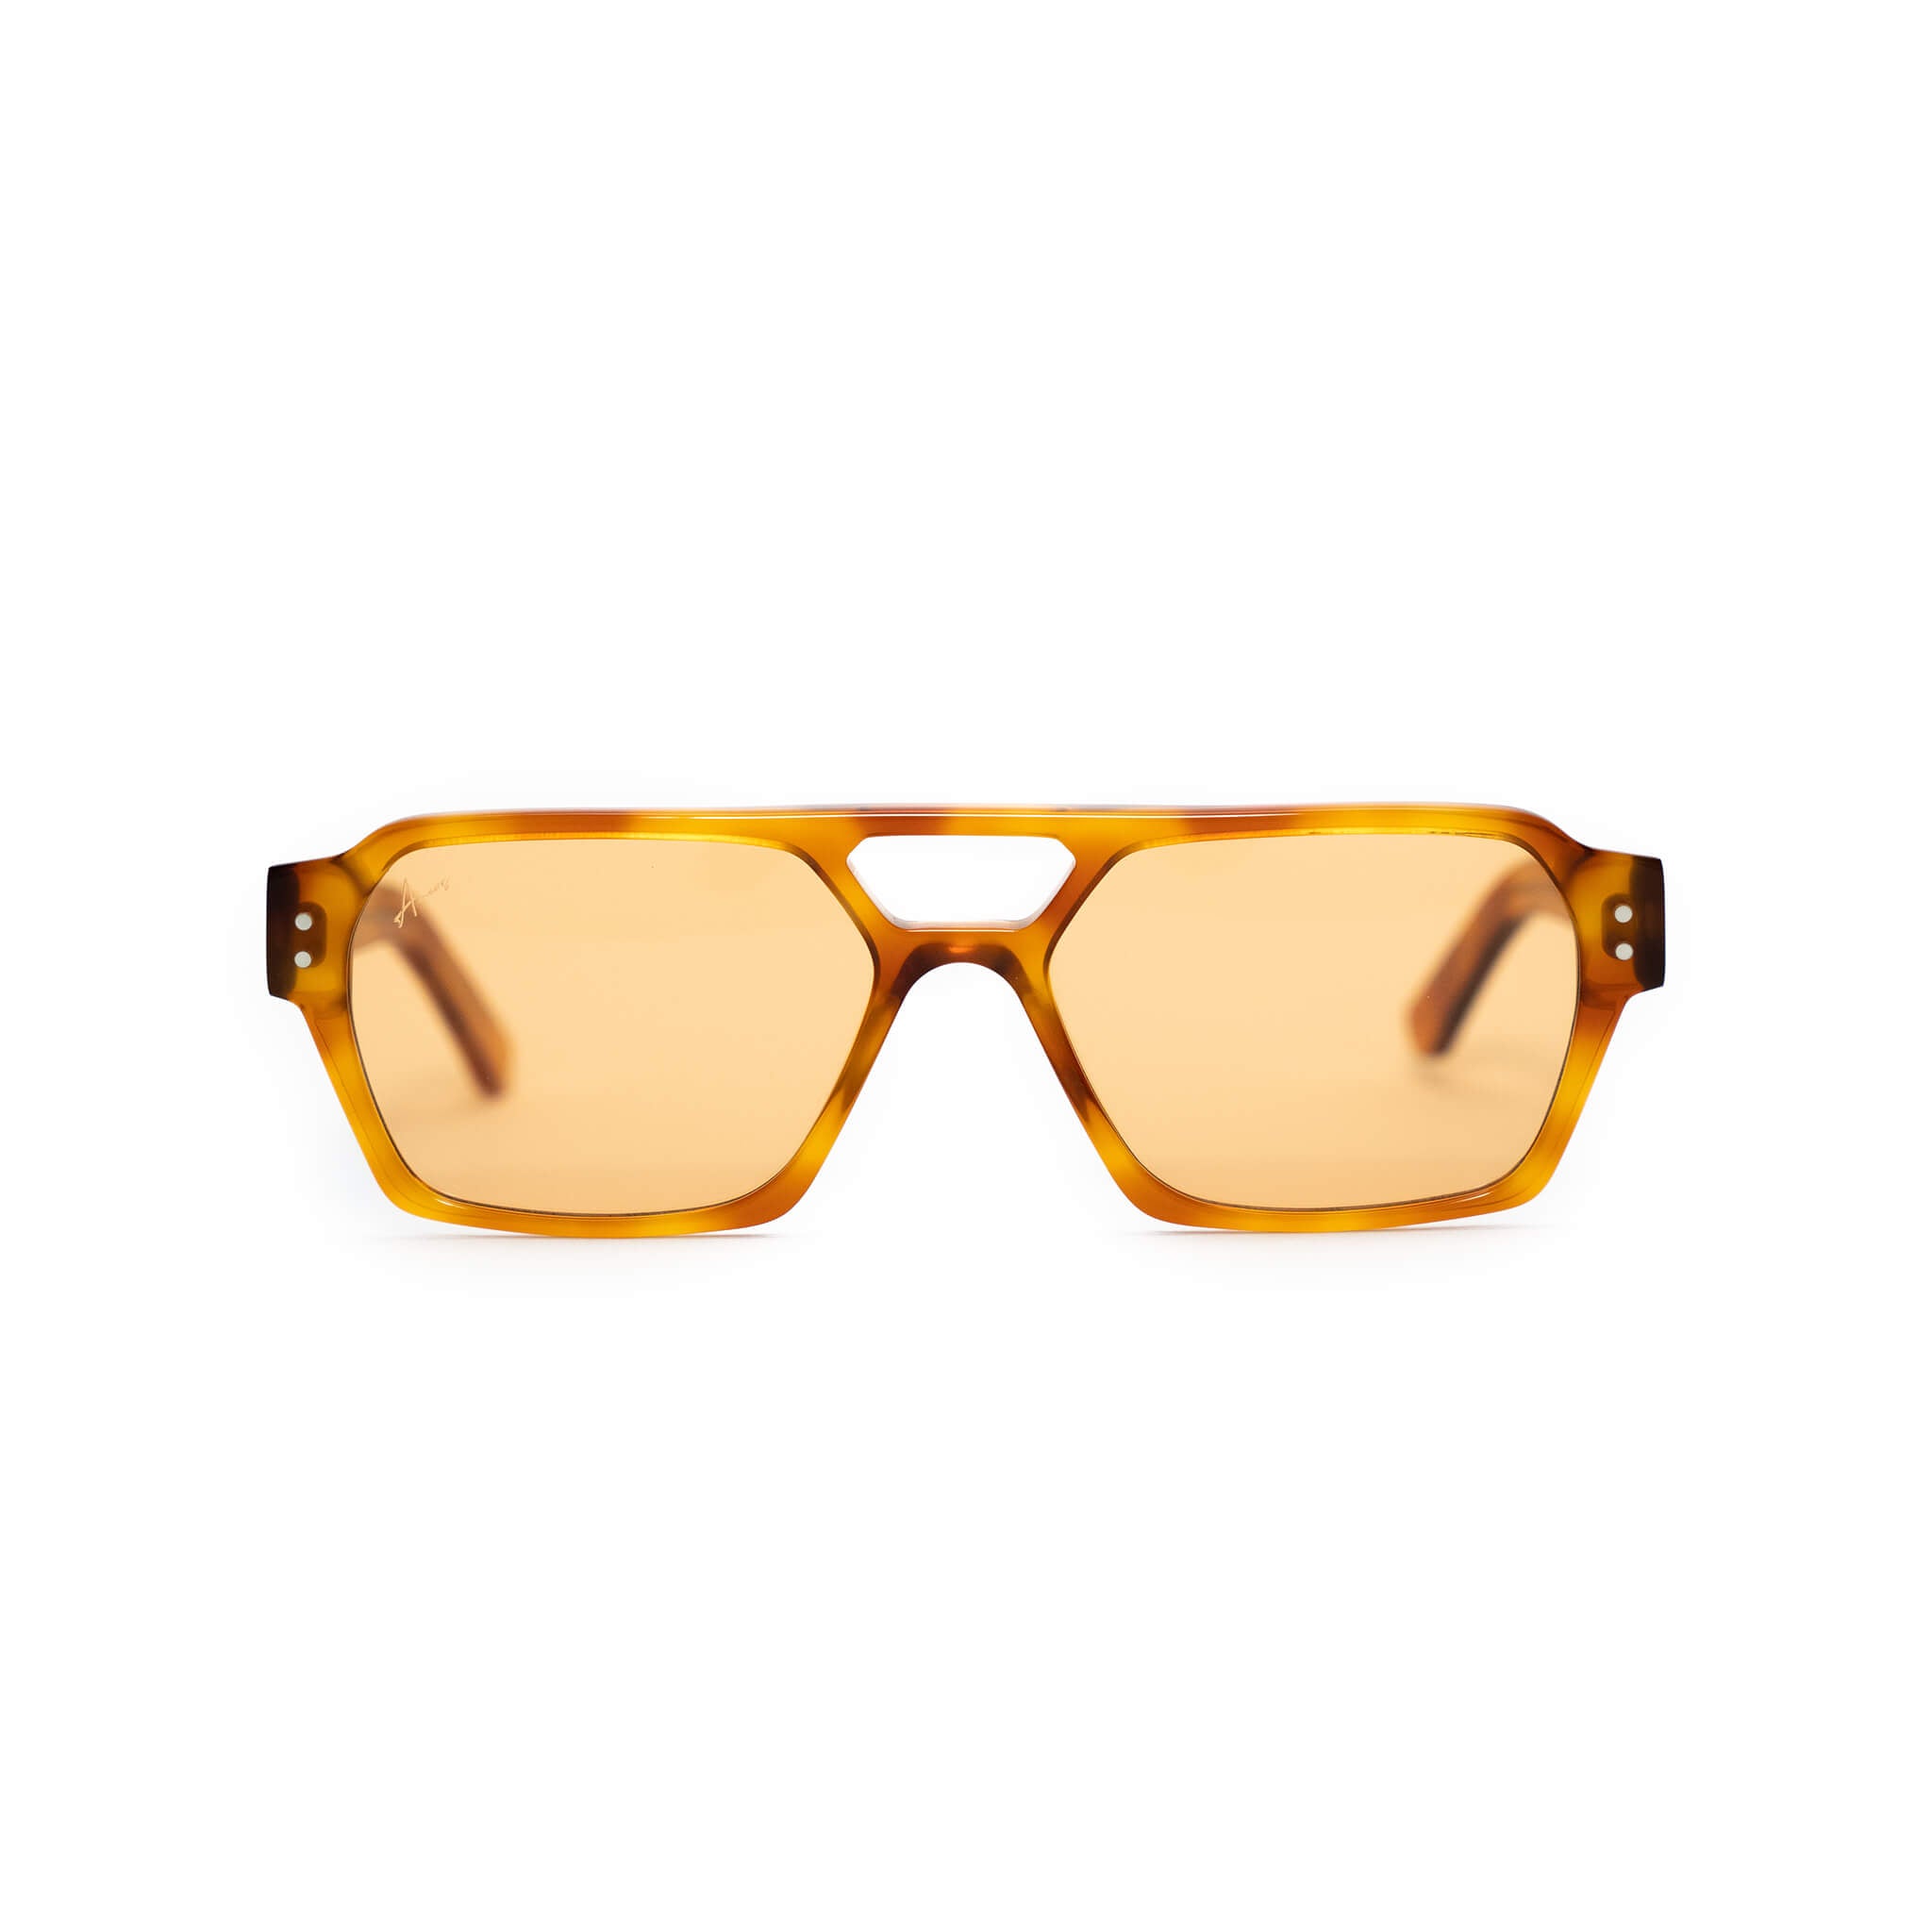 Ego sunglasses in tortoise and orange from Ameos